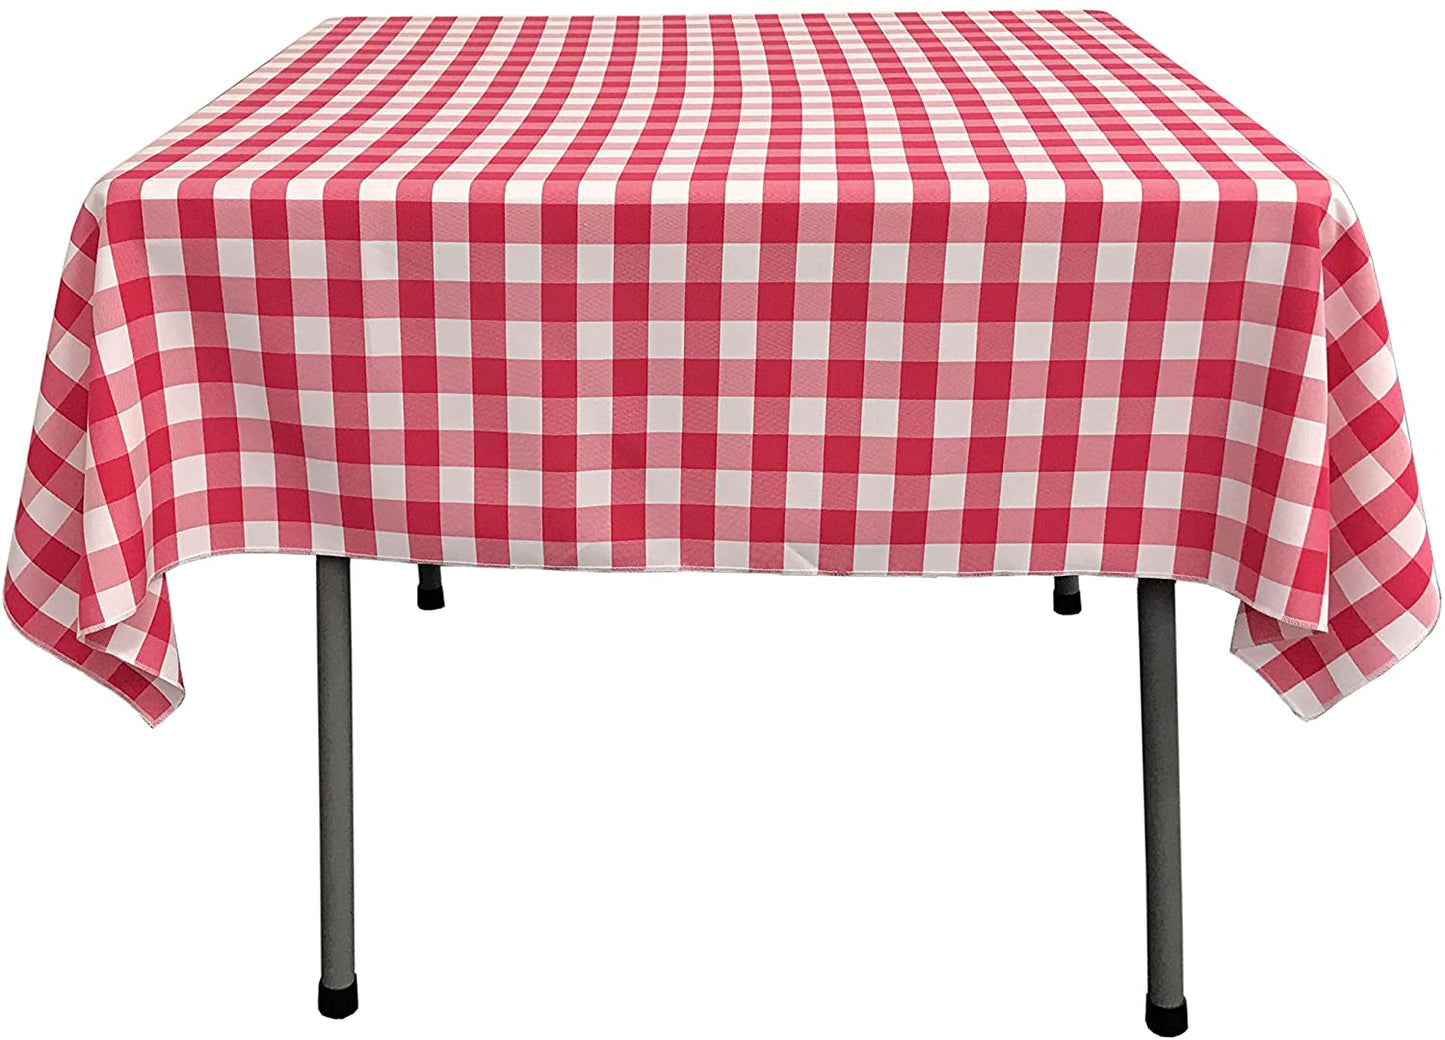 Gingham Checkered Square Tablecloth Fuchsia and White